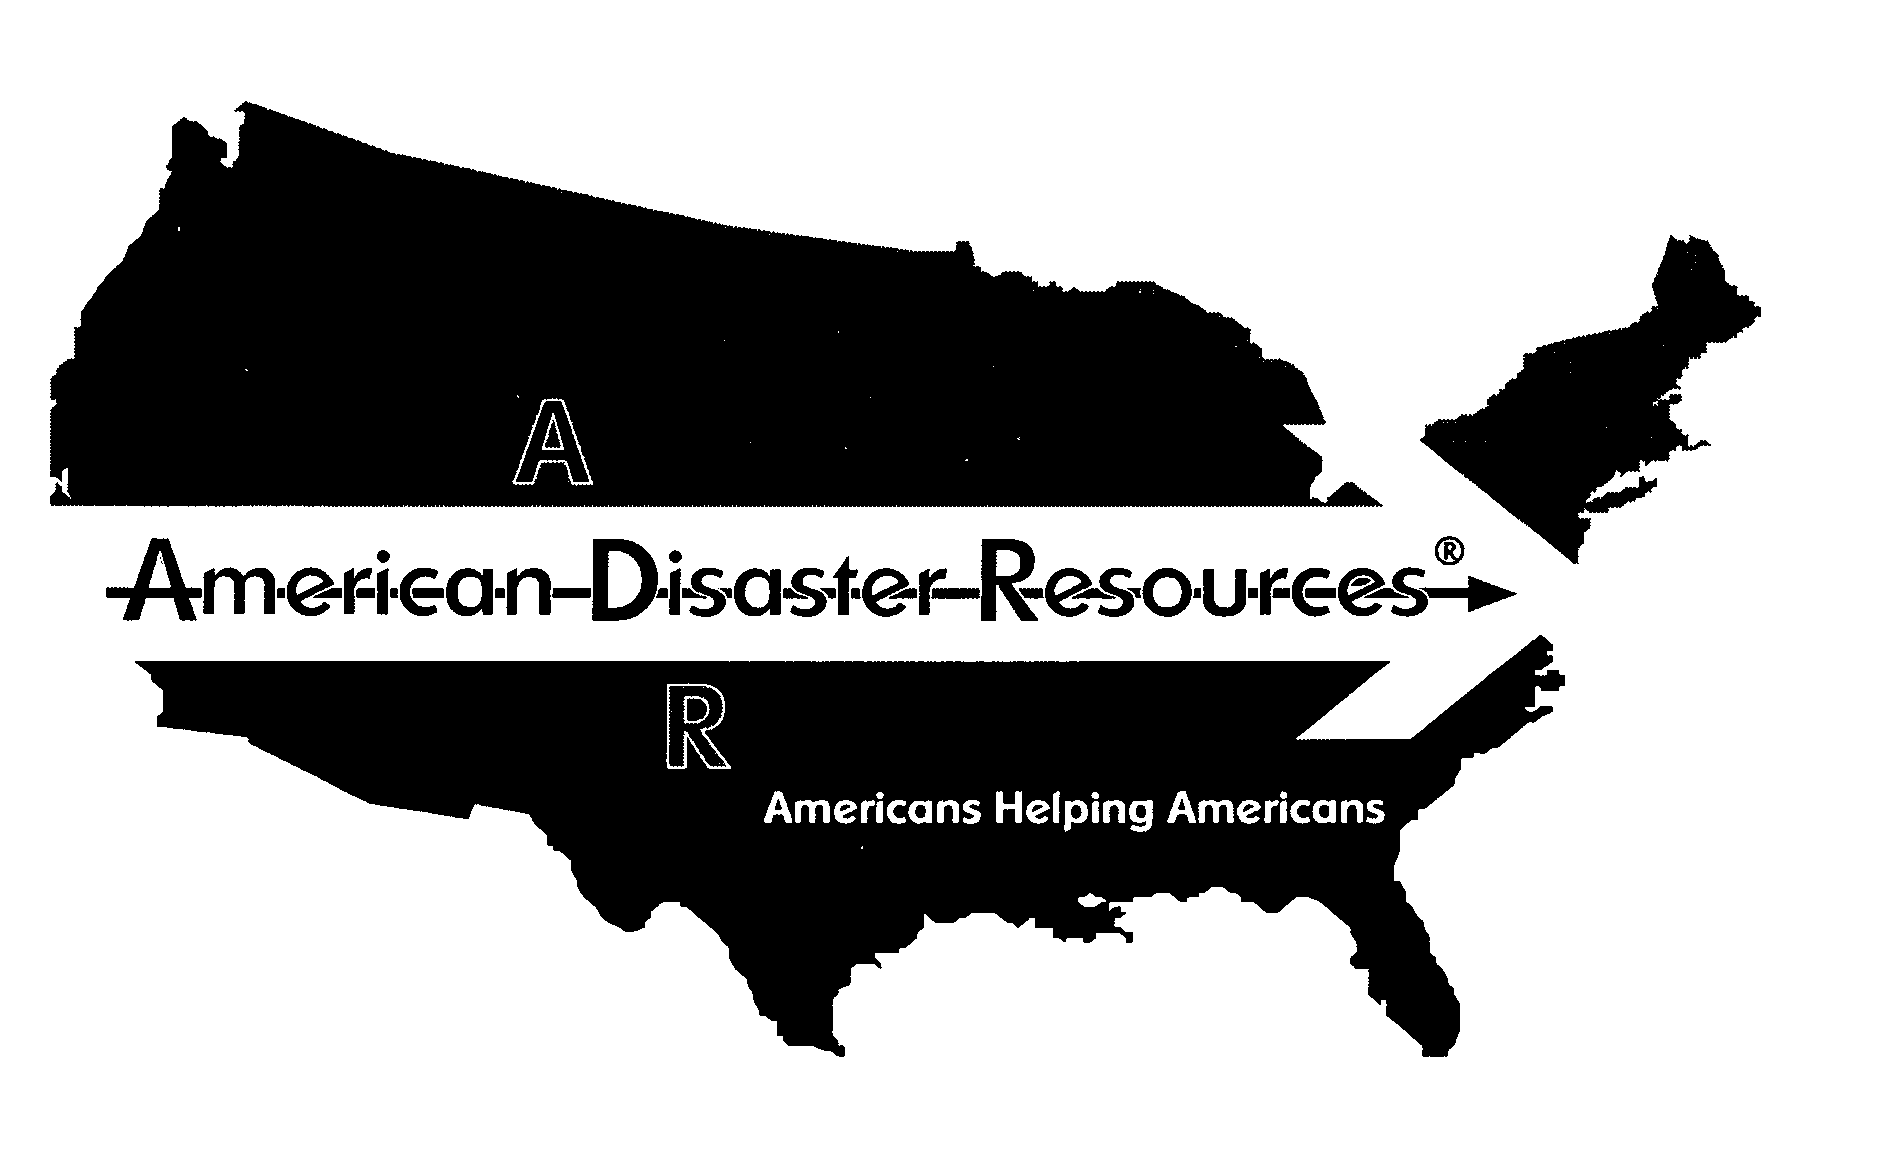  AMERICAN DISASTER RESOURCES AMERICANS HELPING AMERICANS